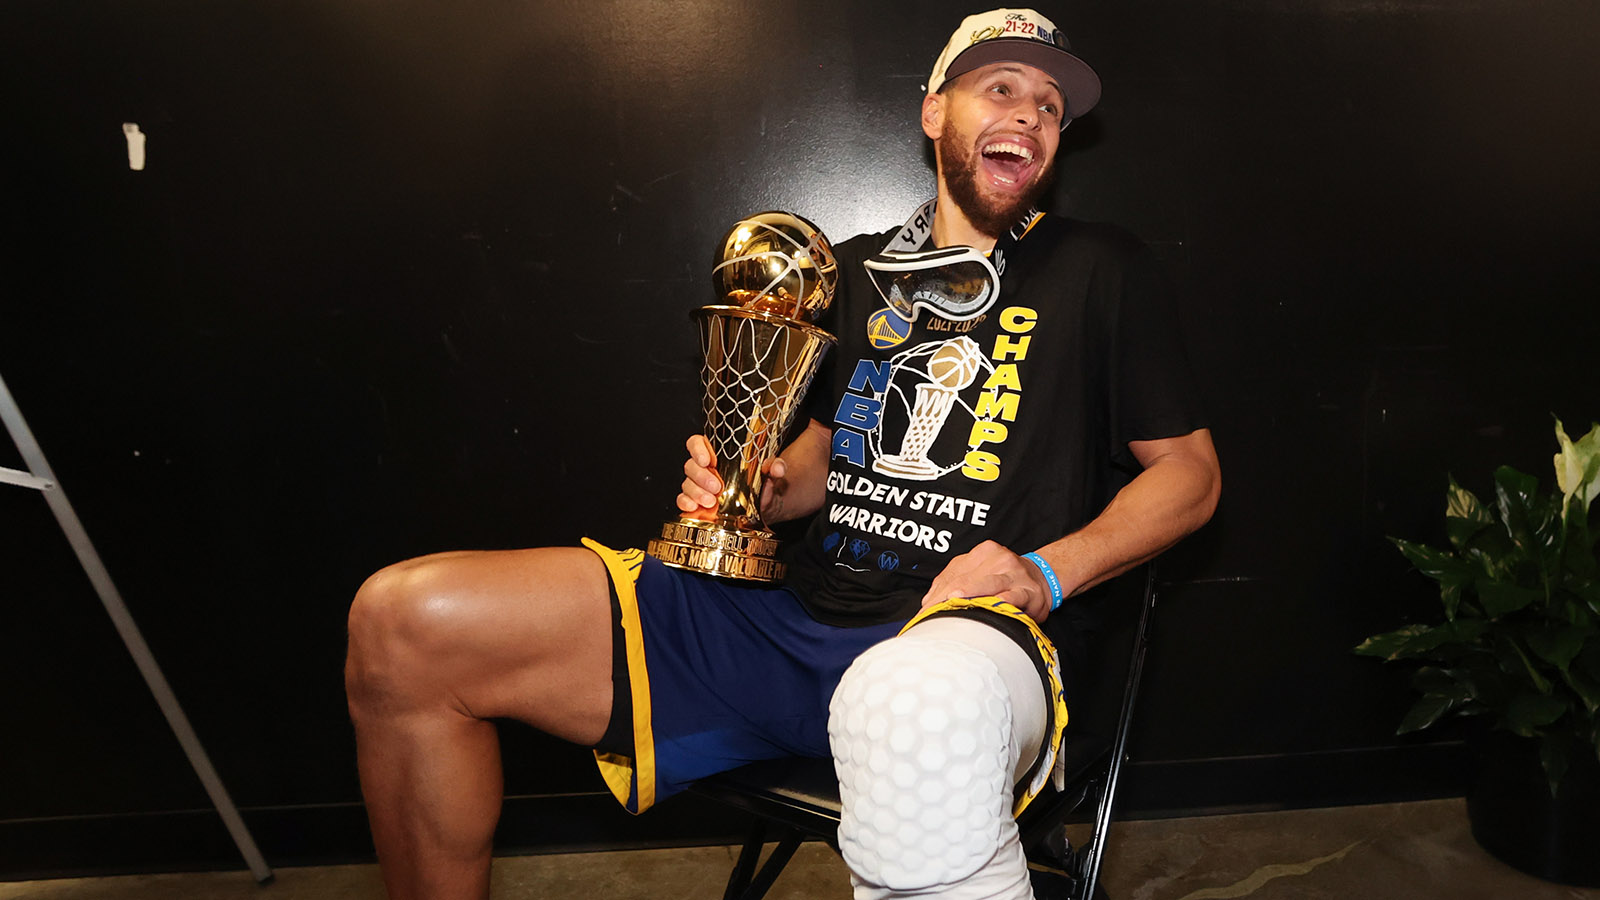 Steph Curry will stay with Under Armour after NBA retirement